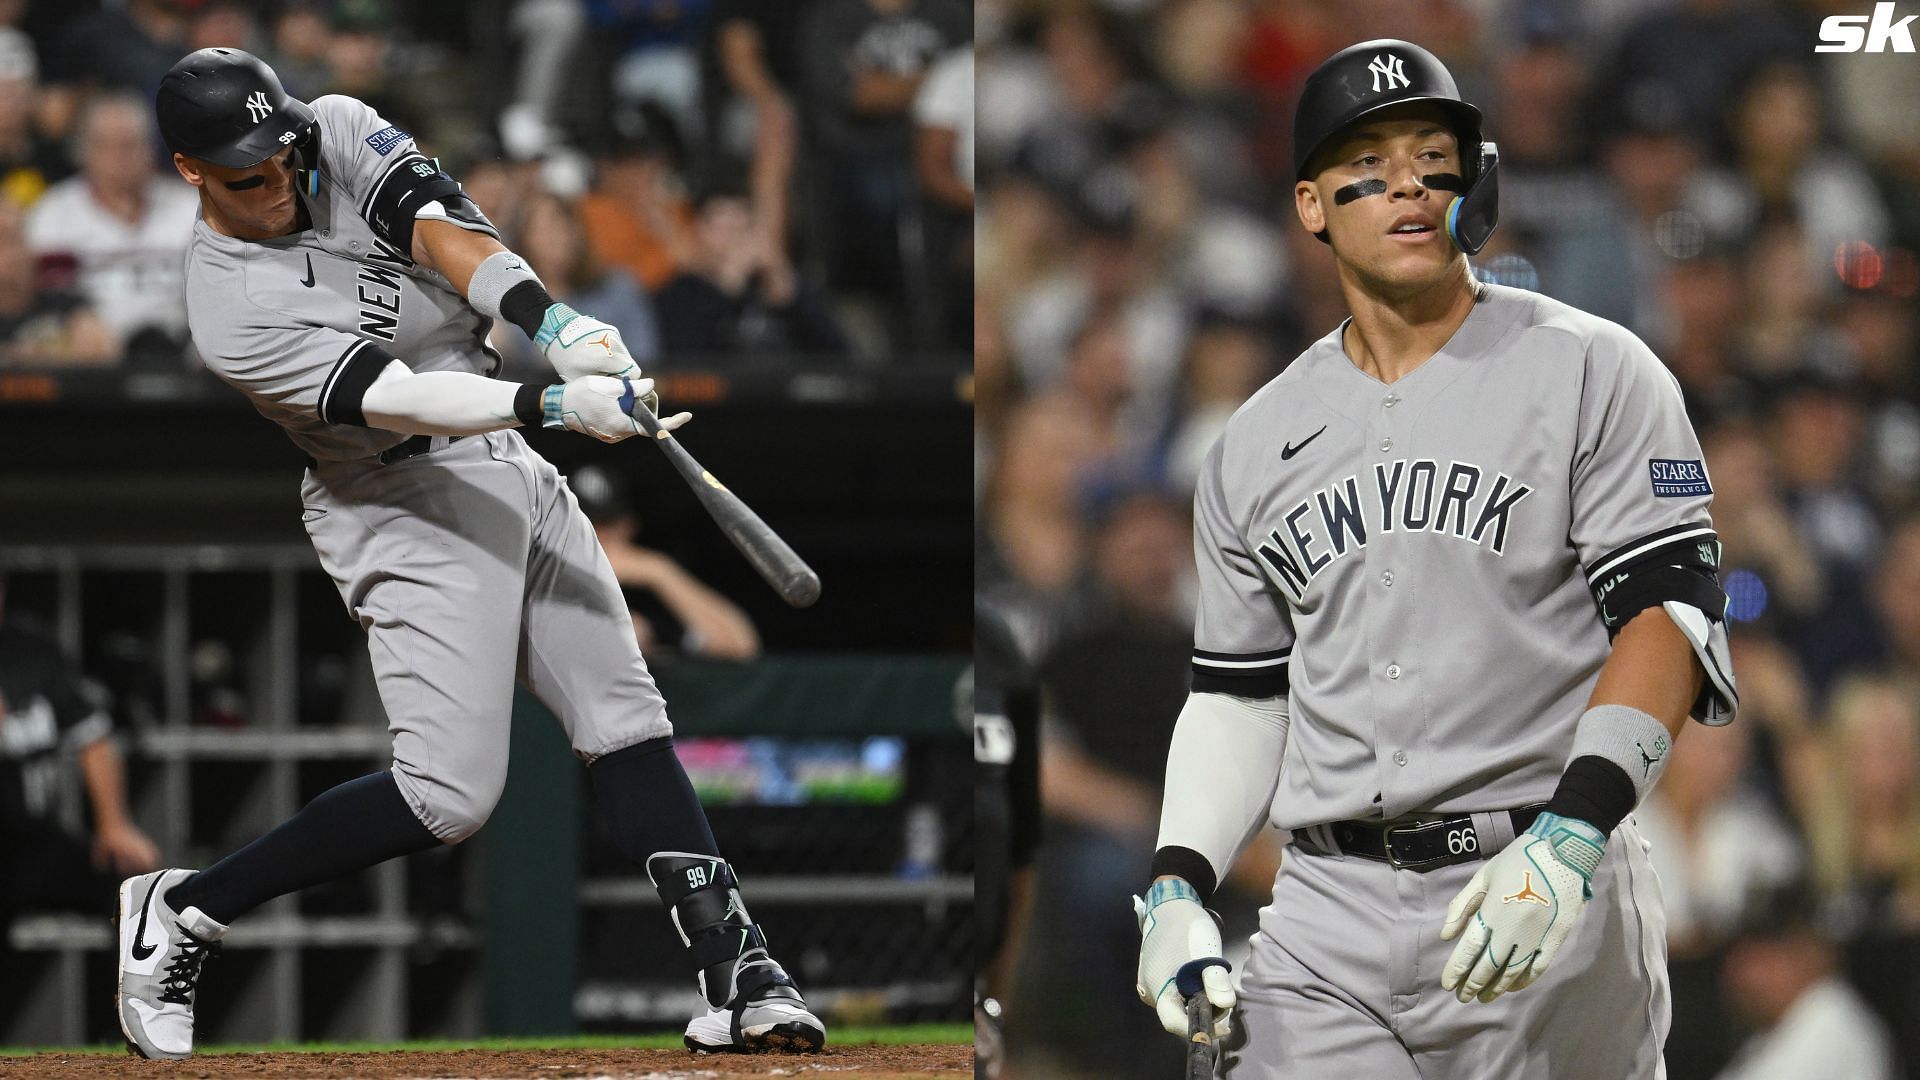 Aaron Judge of the New York Yankees hits a double in the ninth inning against the Chicago White Sox at Guaranteed Rate Field